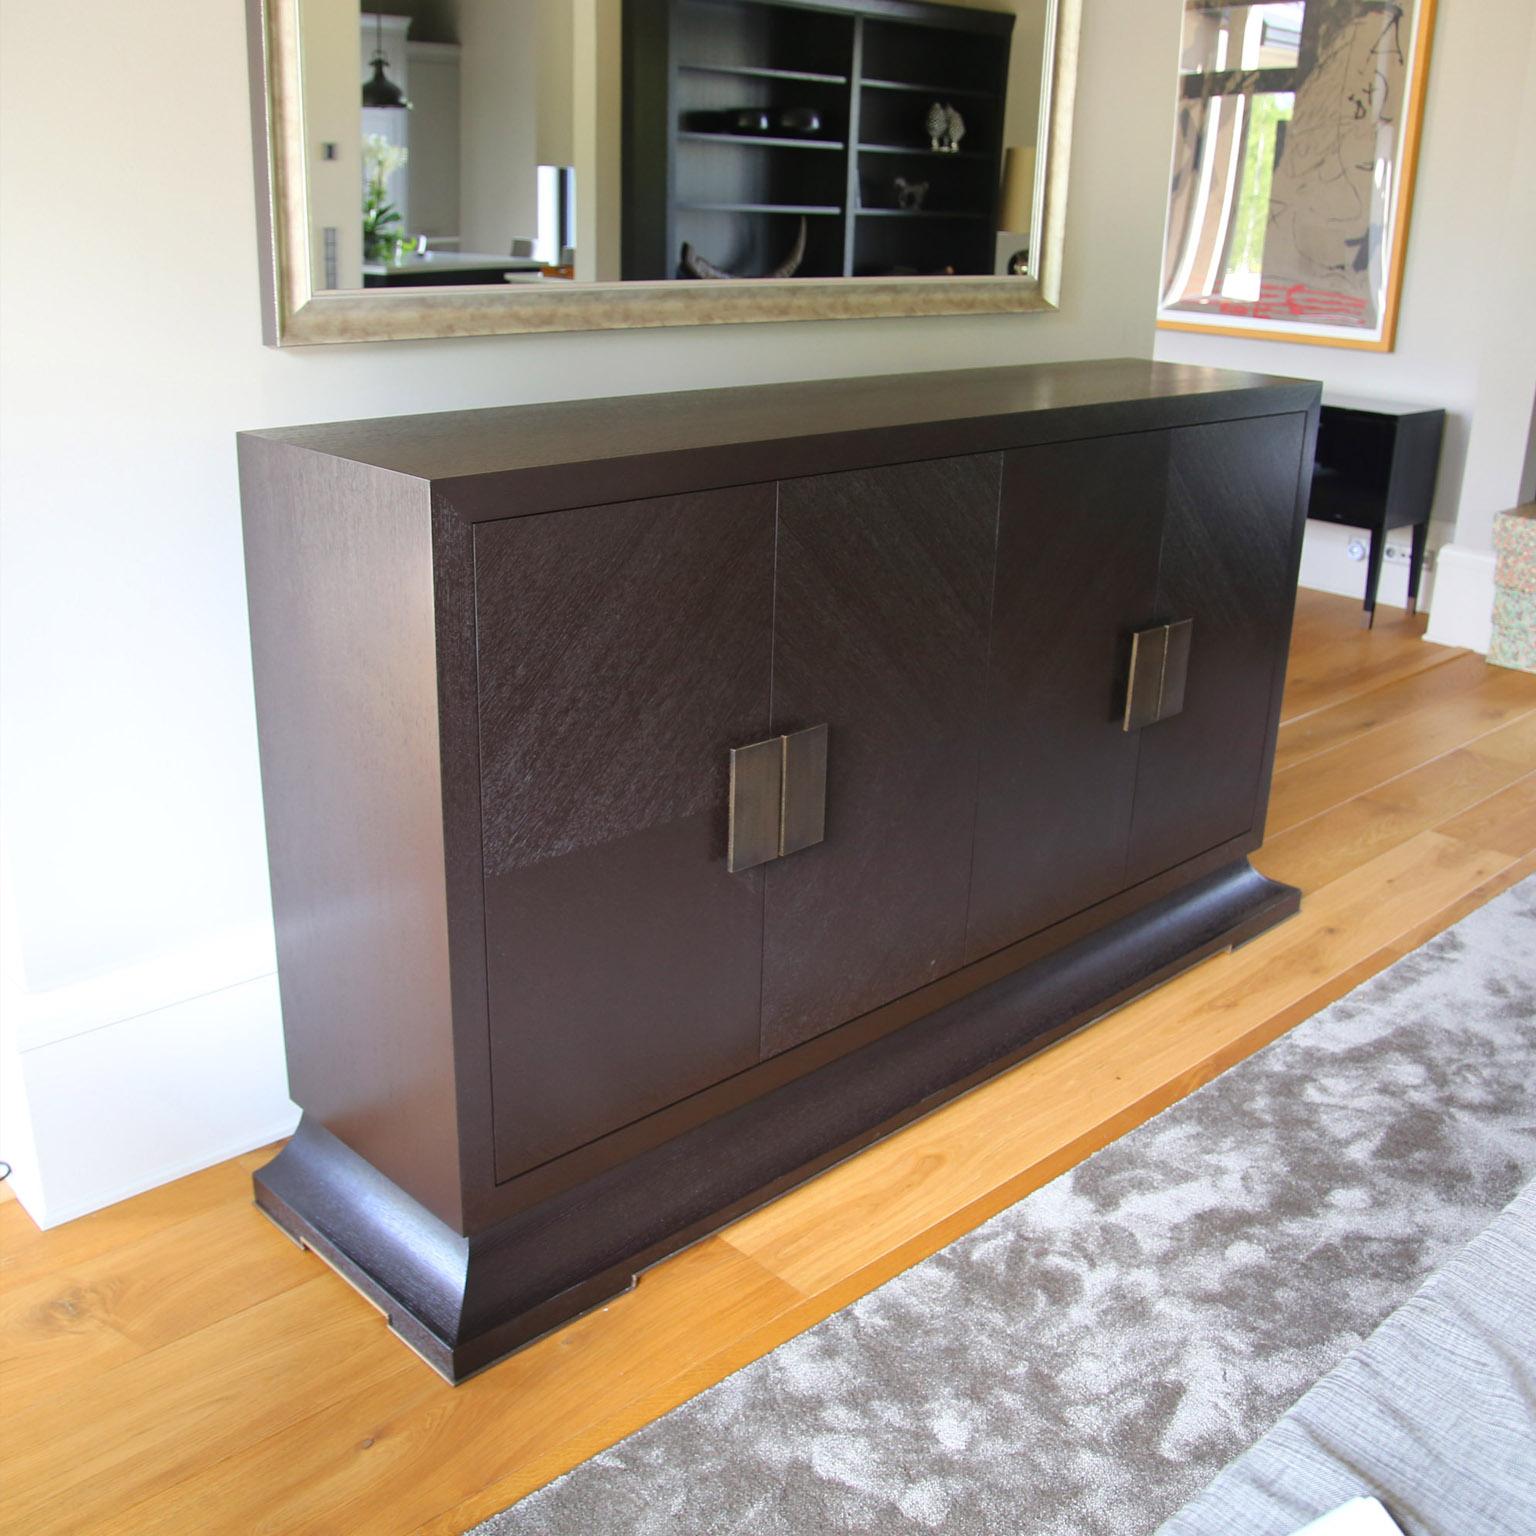 A beautiful sideboard with oakwood inlaying doors, and stunning aged brass handles. The oakwood inlaying is made in a special marquetry technique and finished with 2 coats of anti scratch rich dark brown paint. Combining luxury design with brilliant